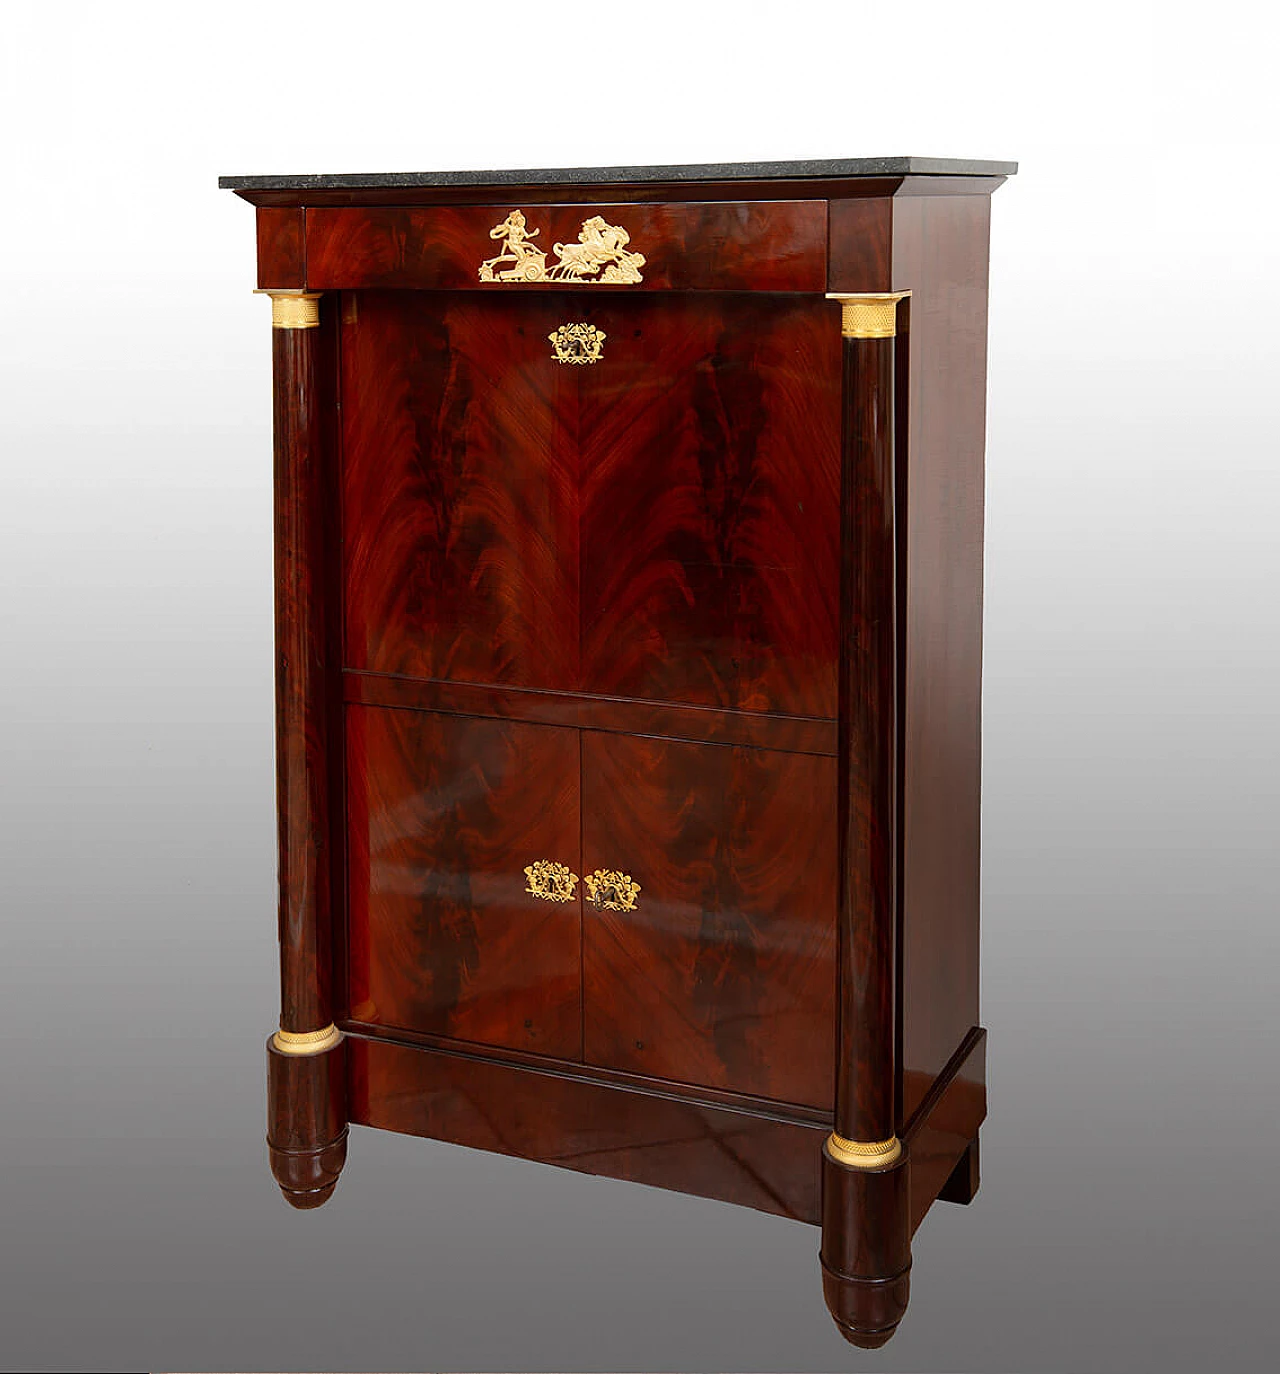 Mahogany feather Empire secrétaire with gilded bronze grafts, 19th century 1